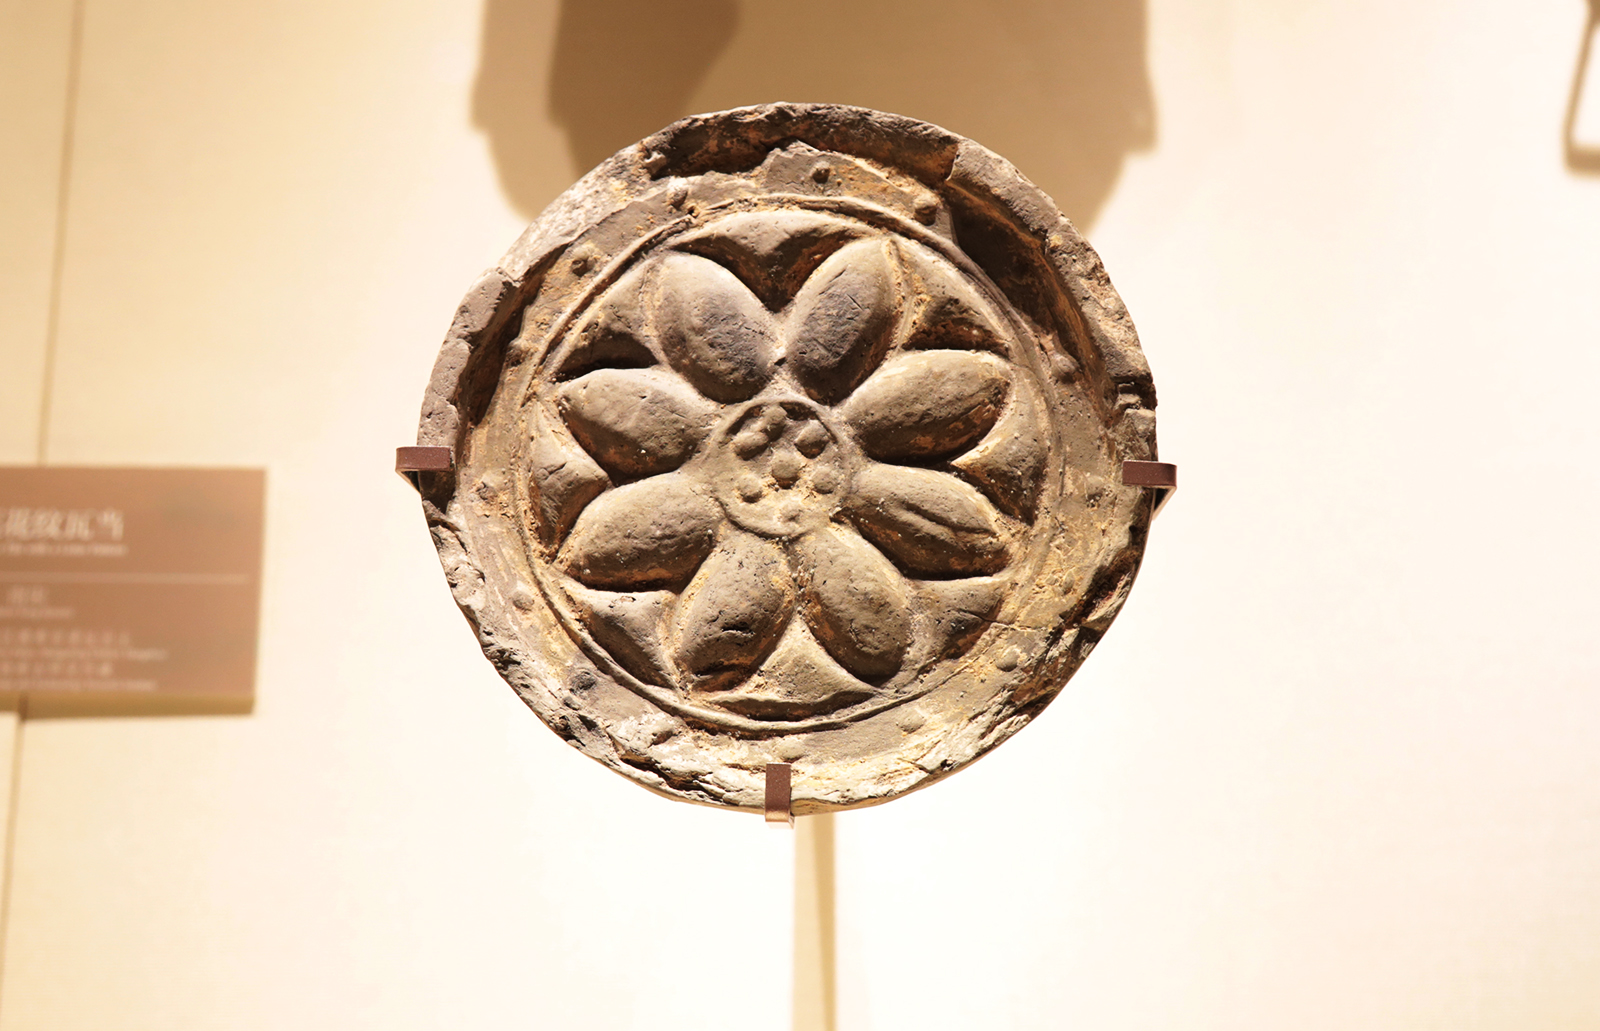 A pottery eaves tile featuring a lotus pattern unearthed from the site of the Deshou Palace is on display at the Deshou Palace Ruins Museum in Hangzhou, Zhejiang Province. /CGTN